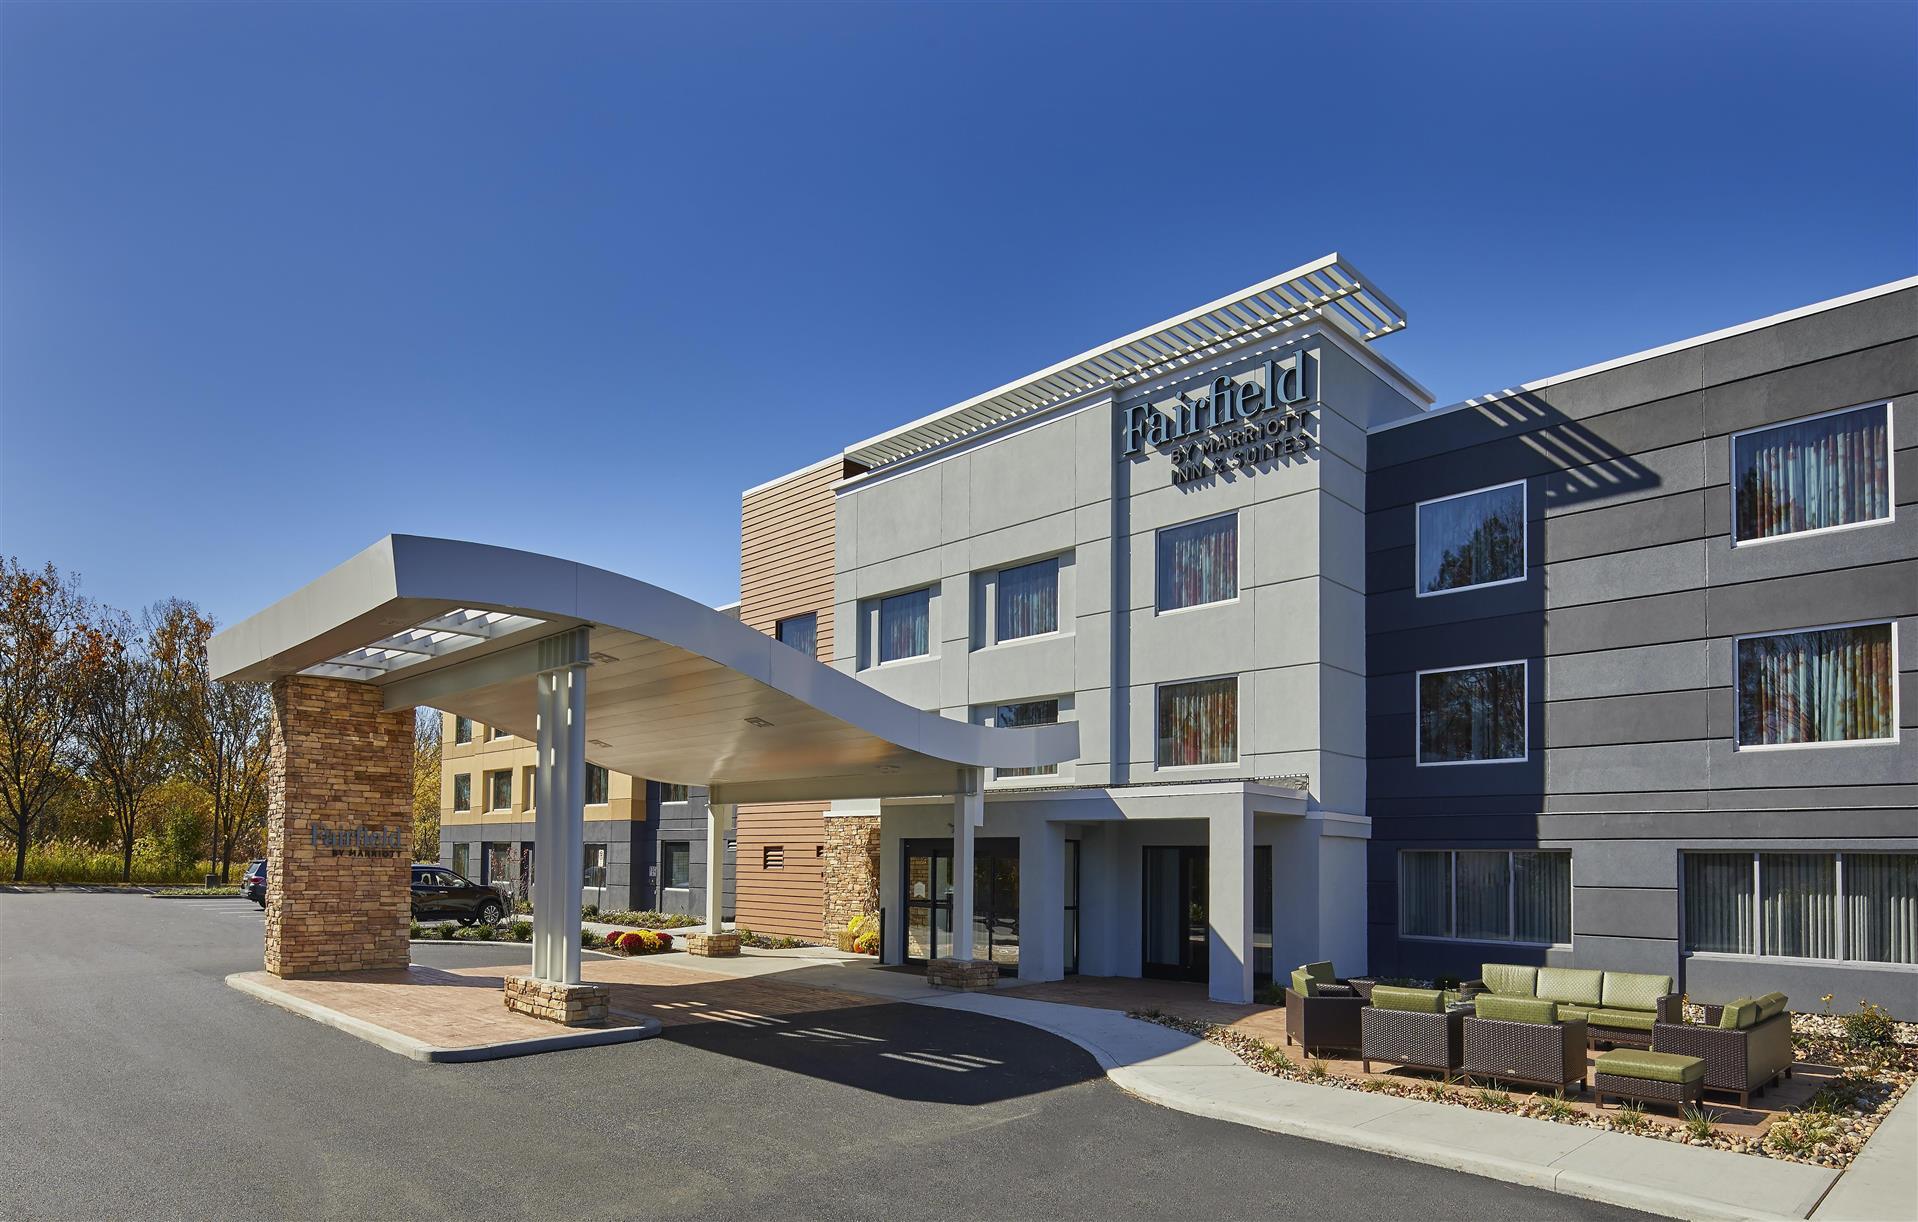 Fairfield Inn & Suites Albany Airport in Albany, NY